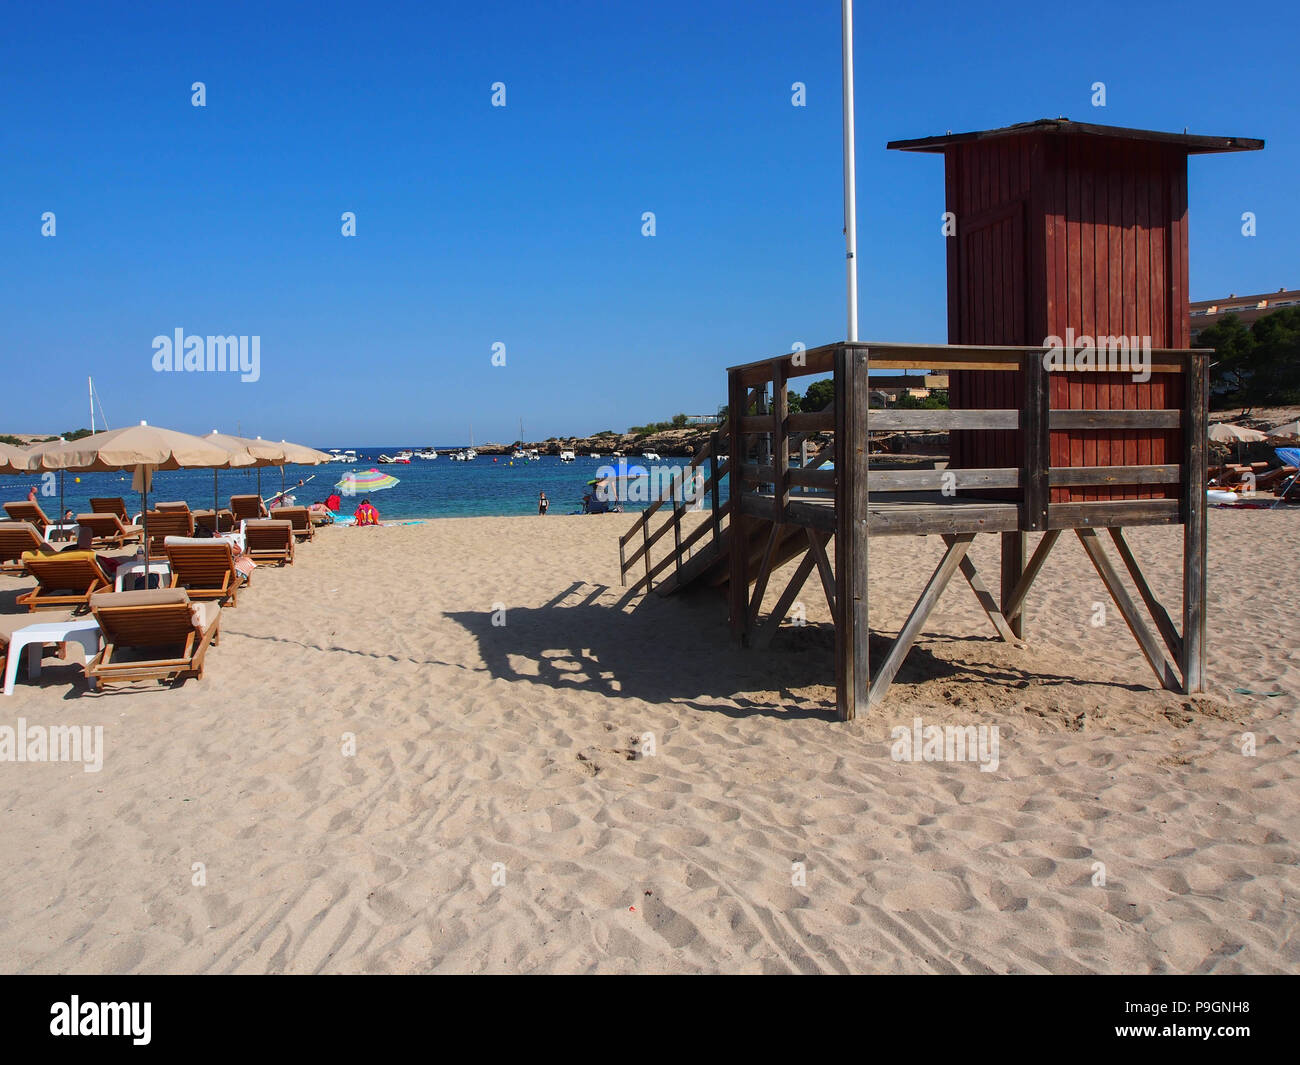 A life guard station on Port D'Es Torrent beach in Ibiza, Balearic Islands, Spain Stock Photo